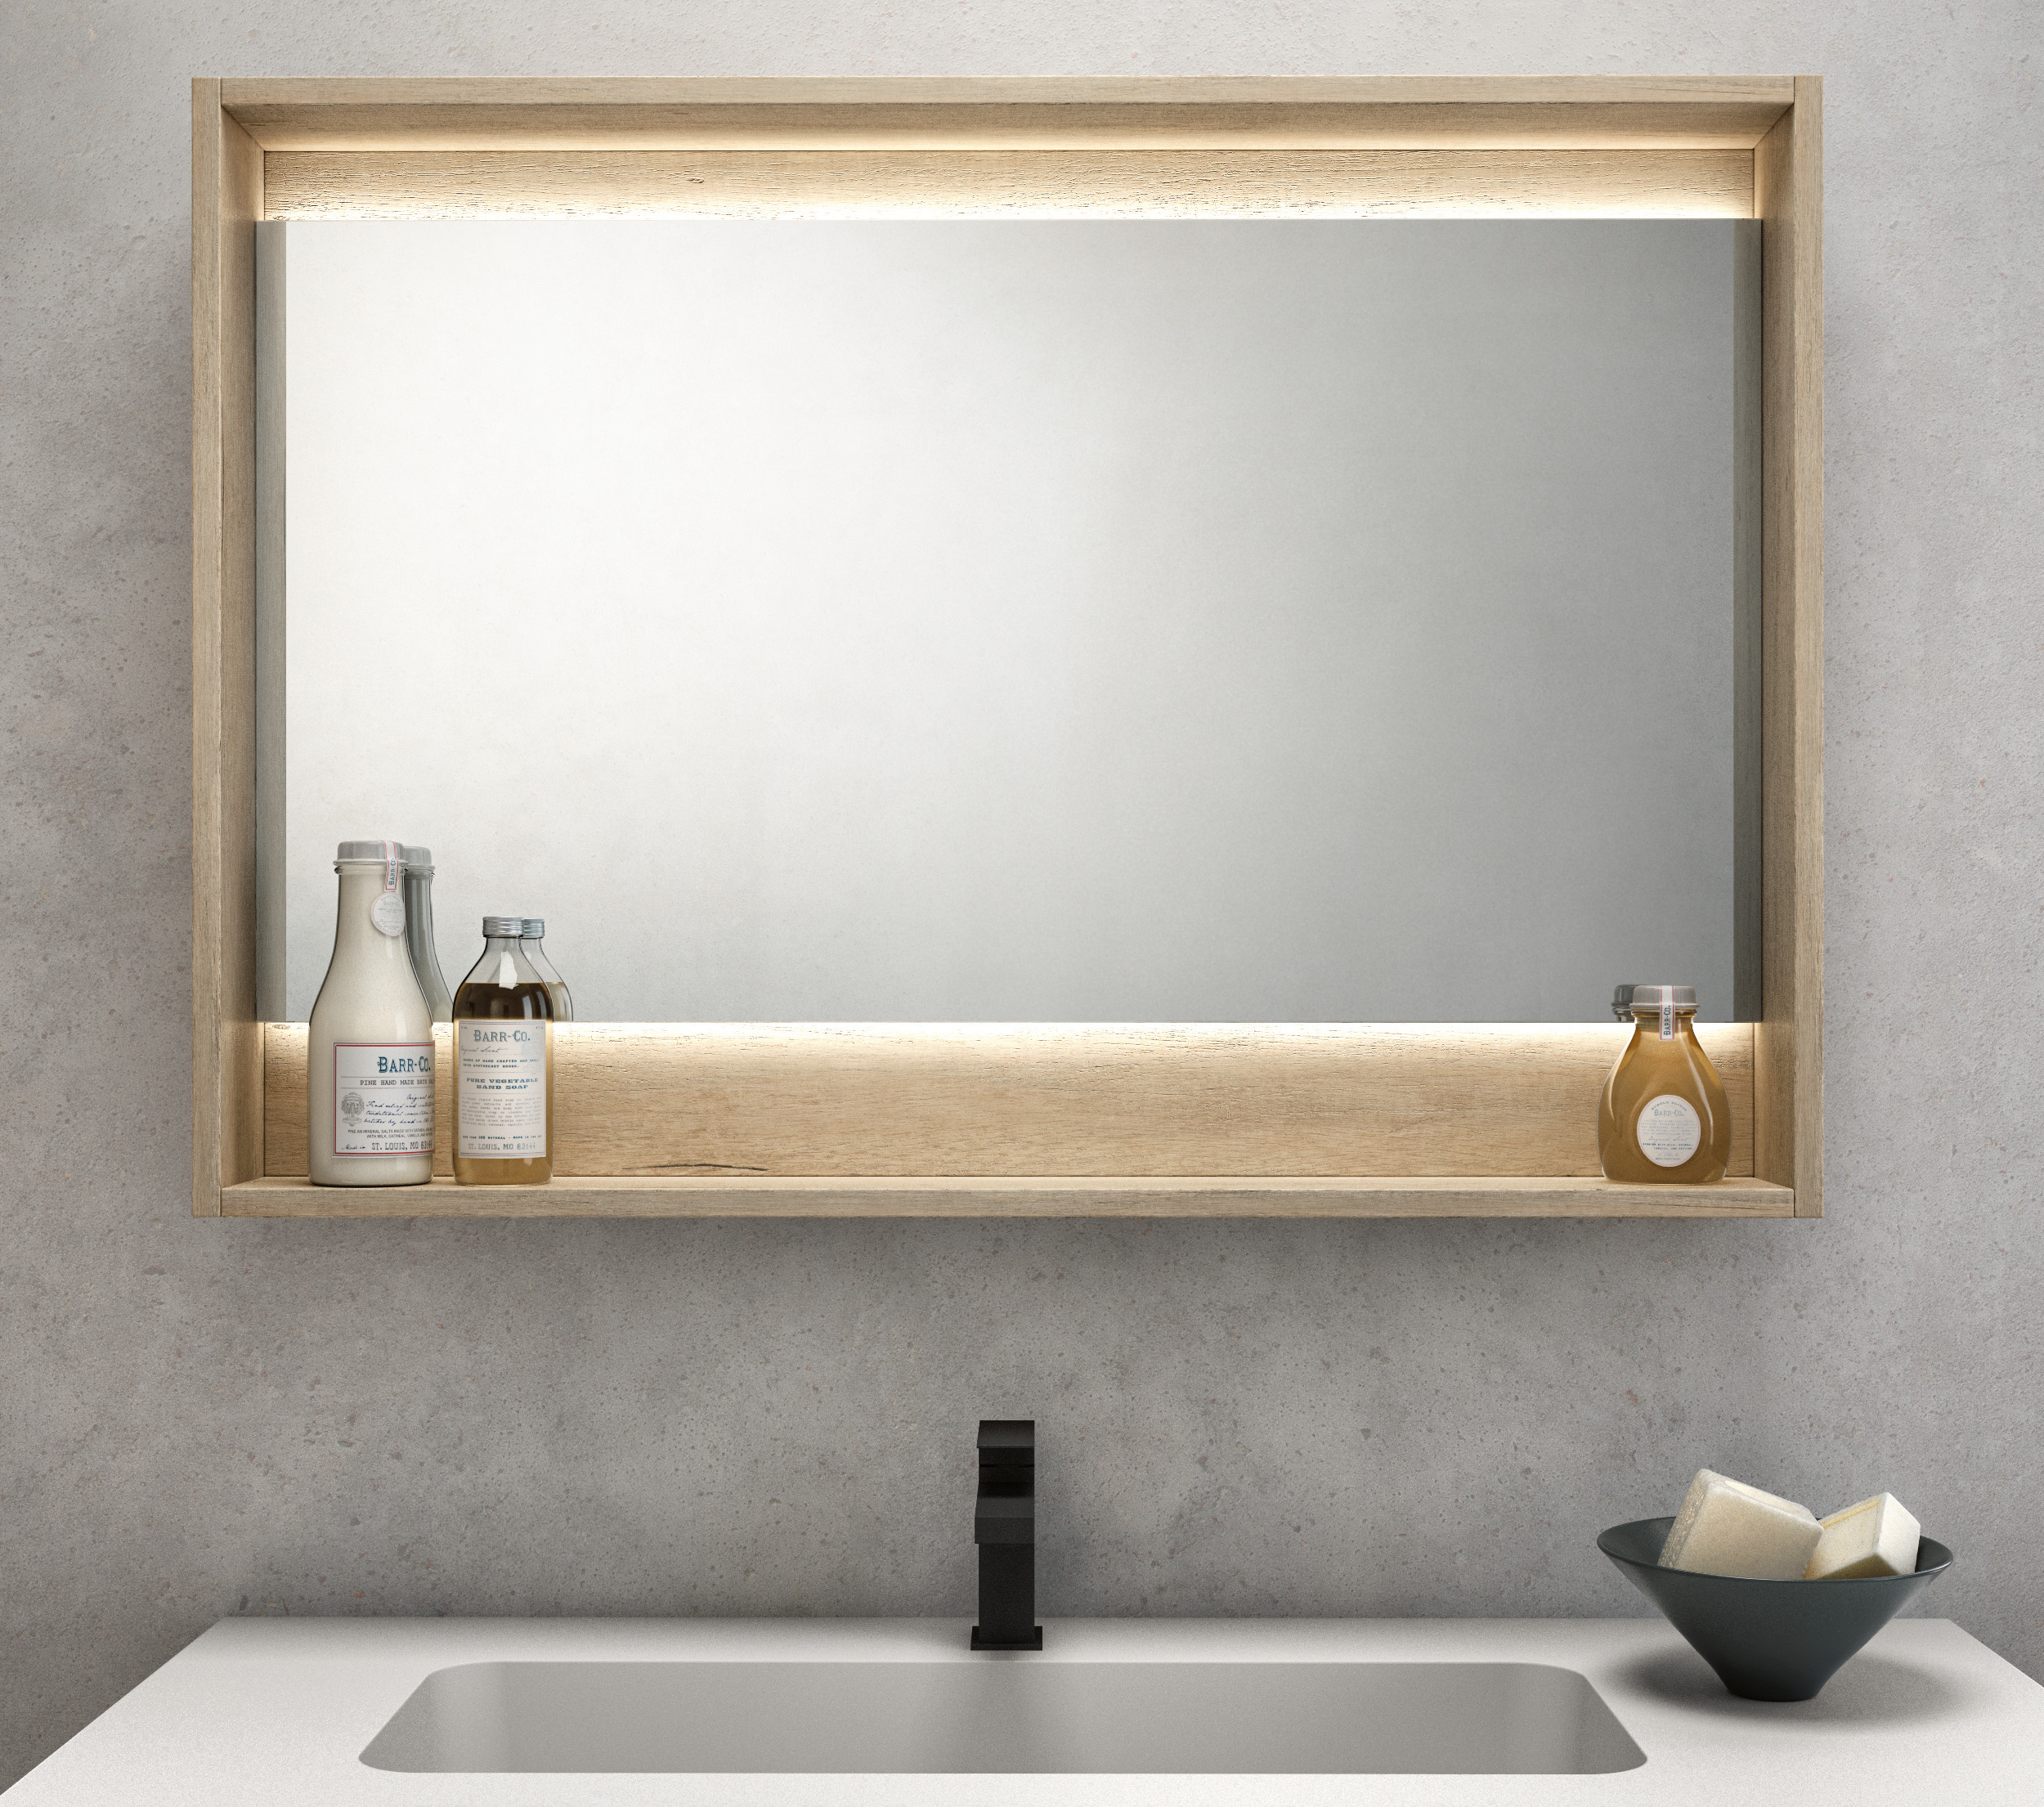 7 Medicine Cabinets That Will Upgrade, Bathroom Medicine Cabinets With Mirrors Recessed